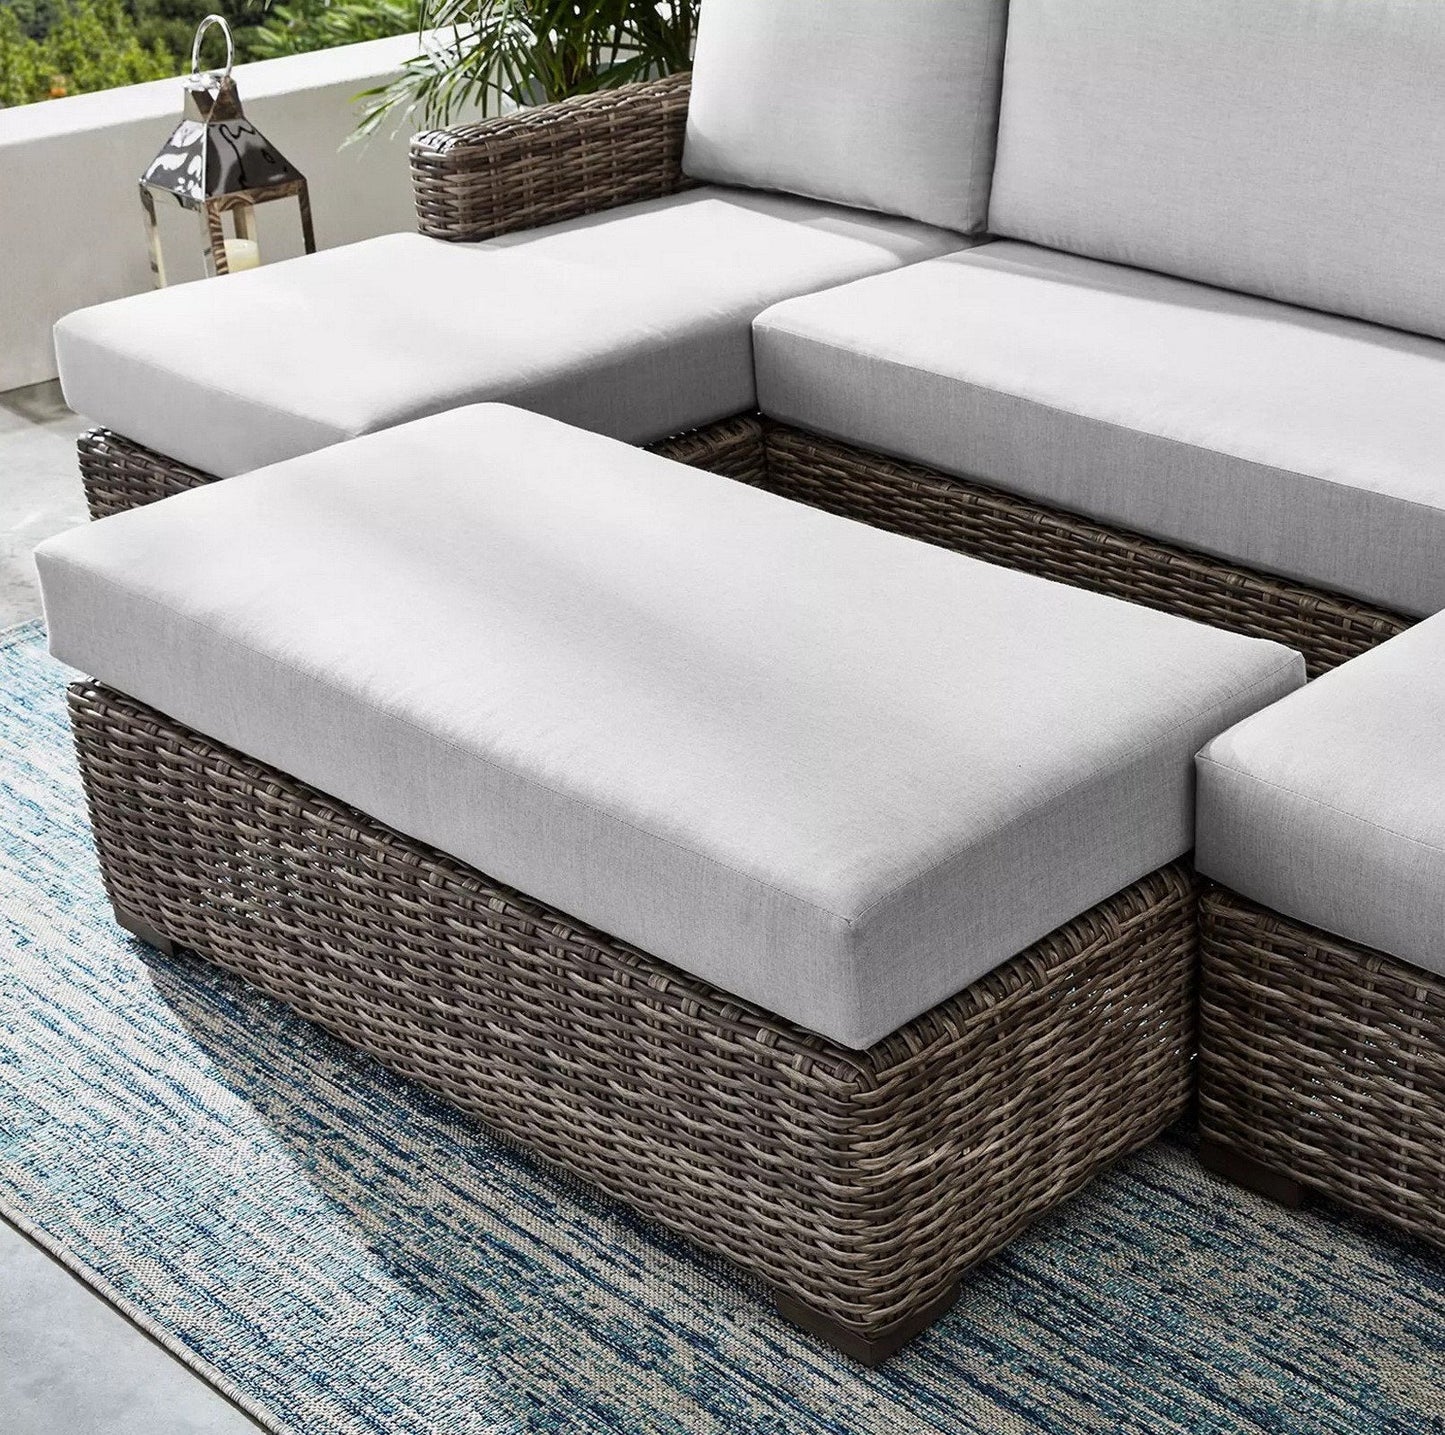 Halstead Outdoor Cushioned Wicker 4-Piece Sectional Set